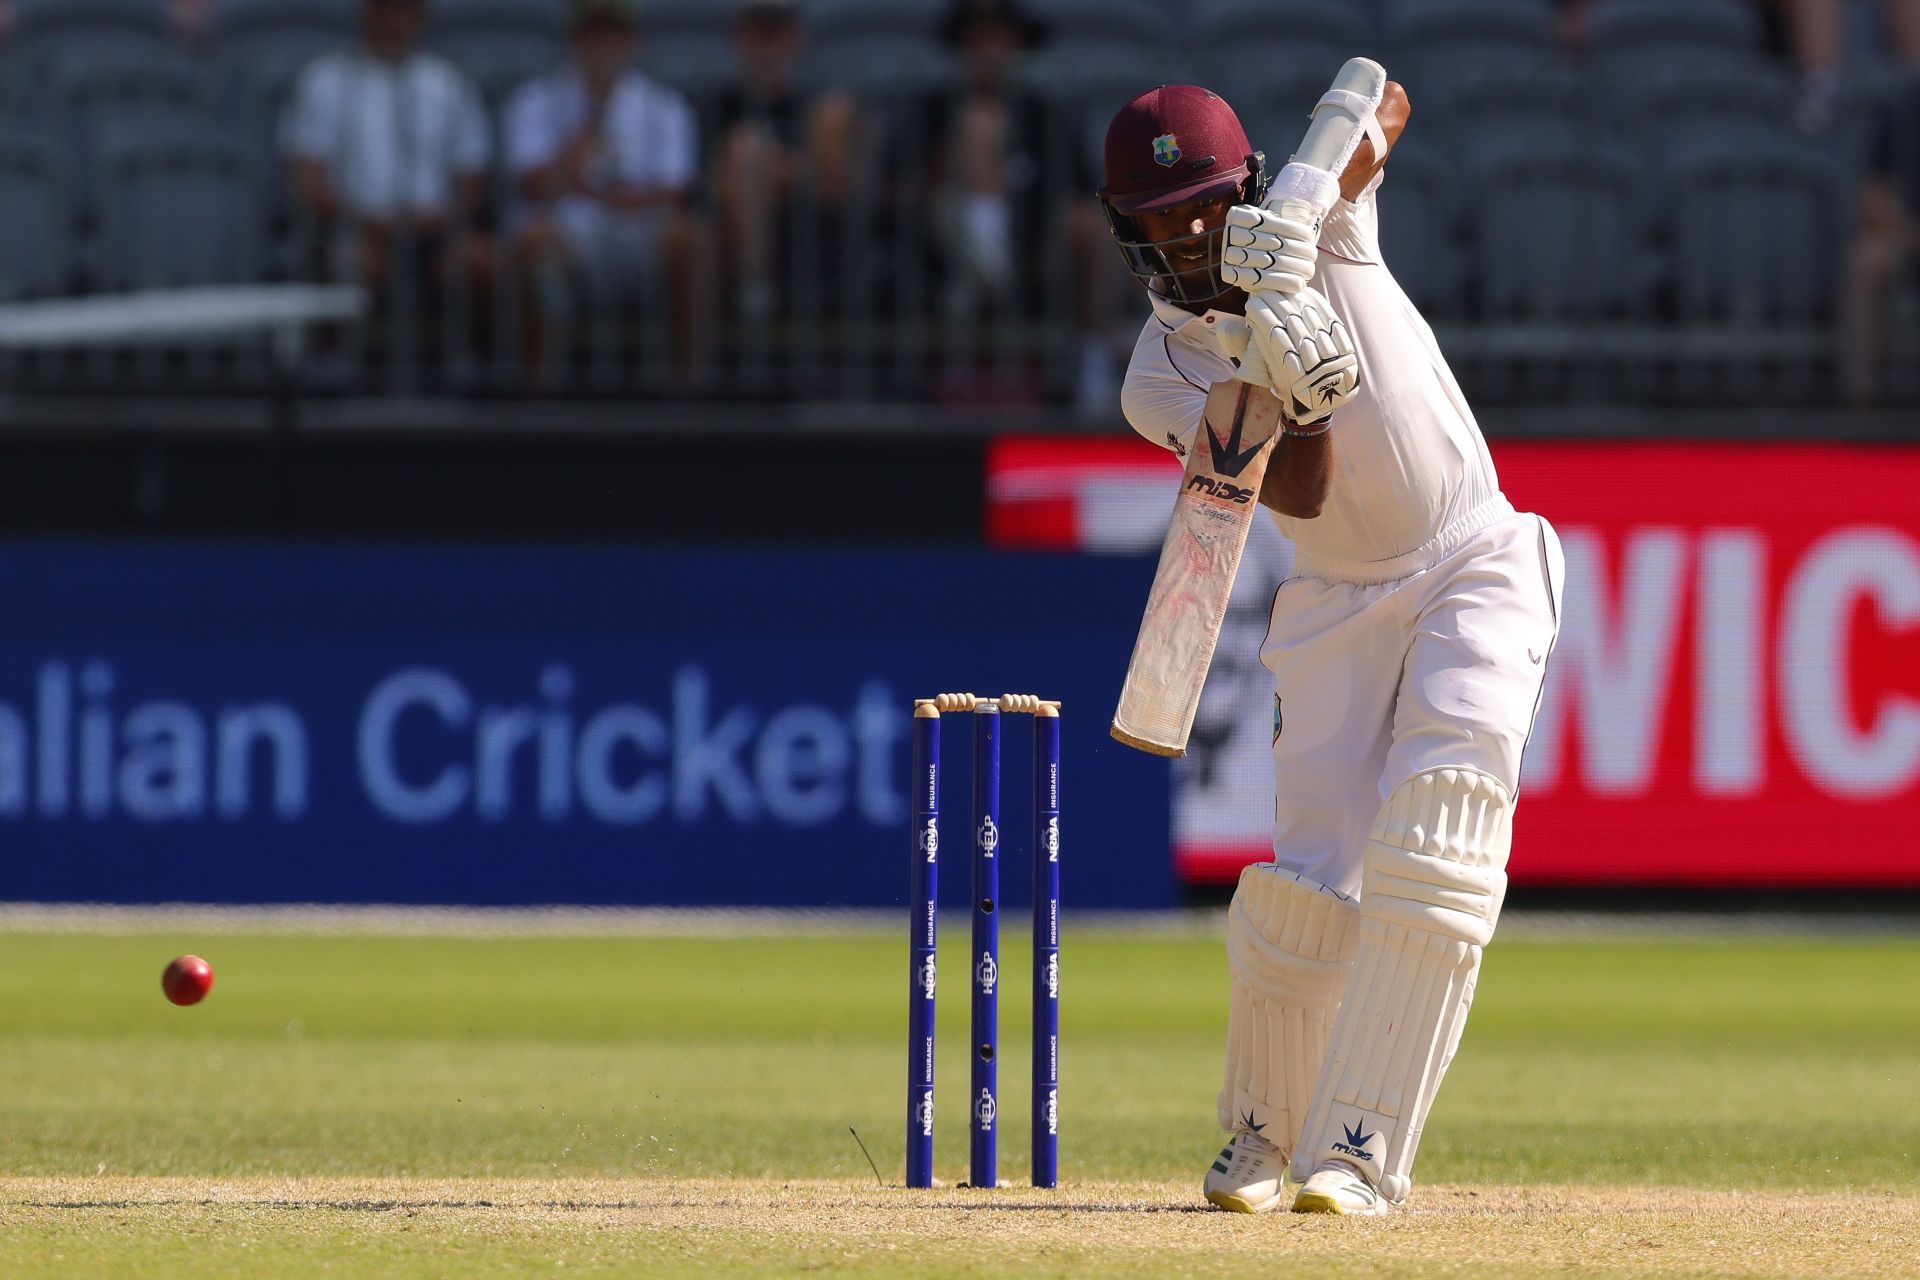 Australia v West Indies - First Test: Day 4 (Image: Getty)